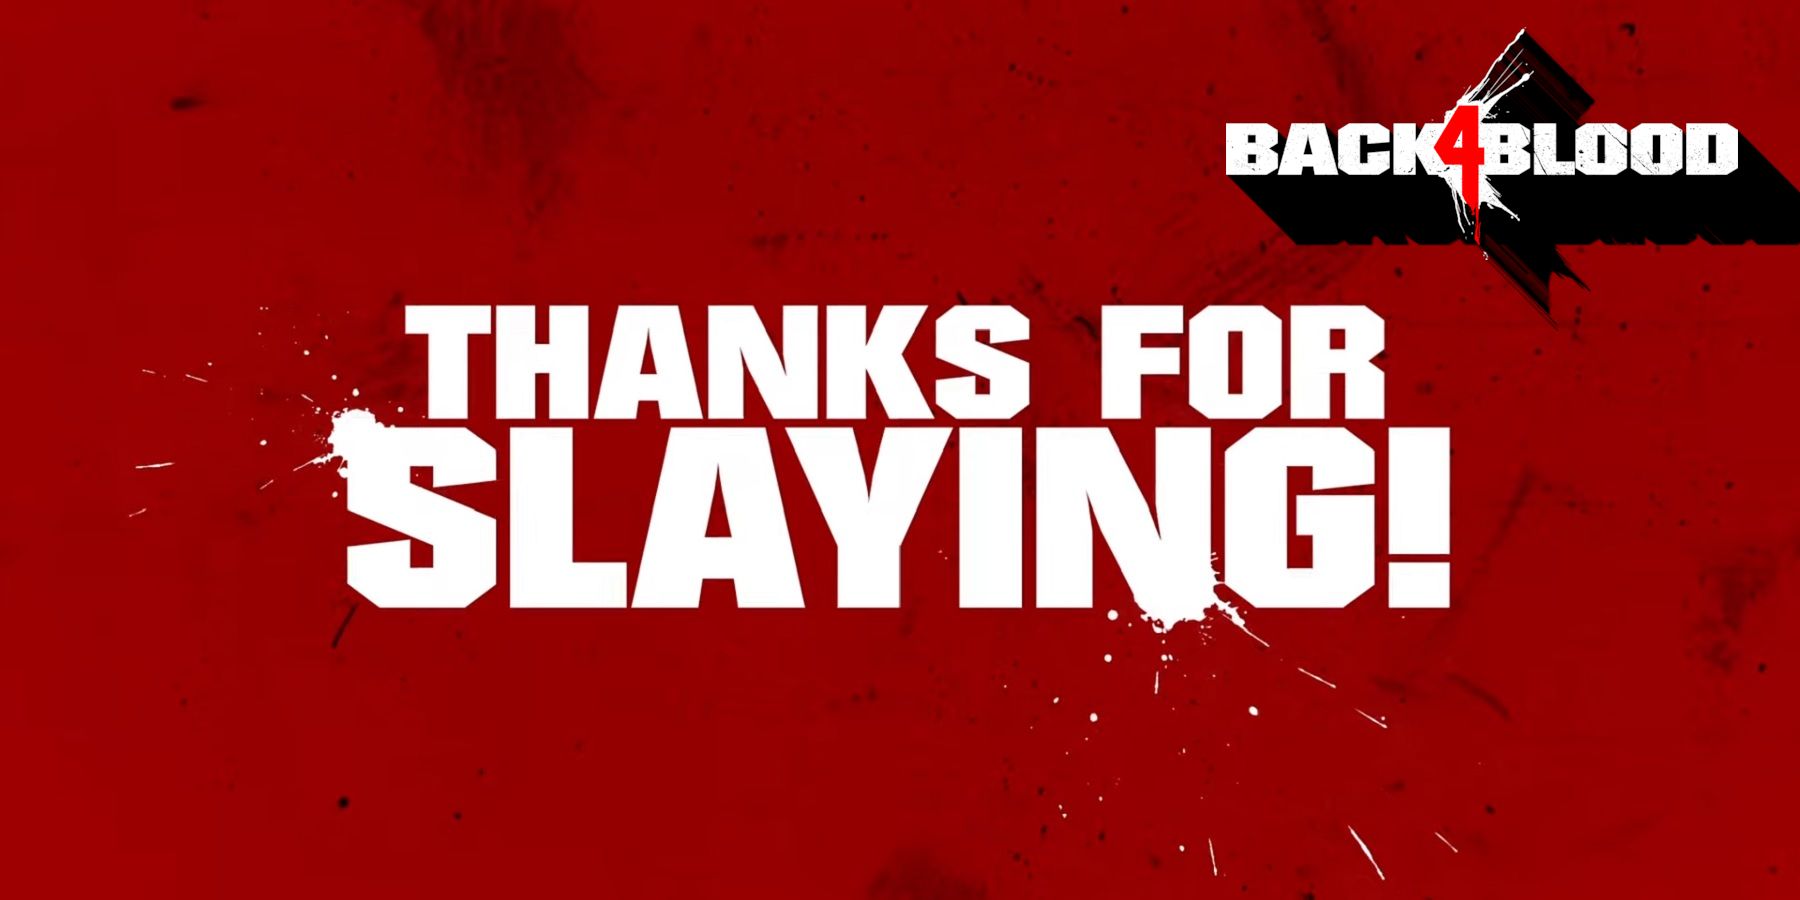 Red image showing the Back 4 Blood logo in the corner and the words 